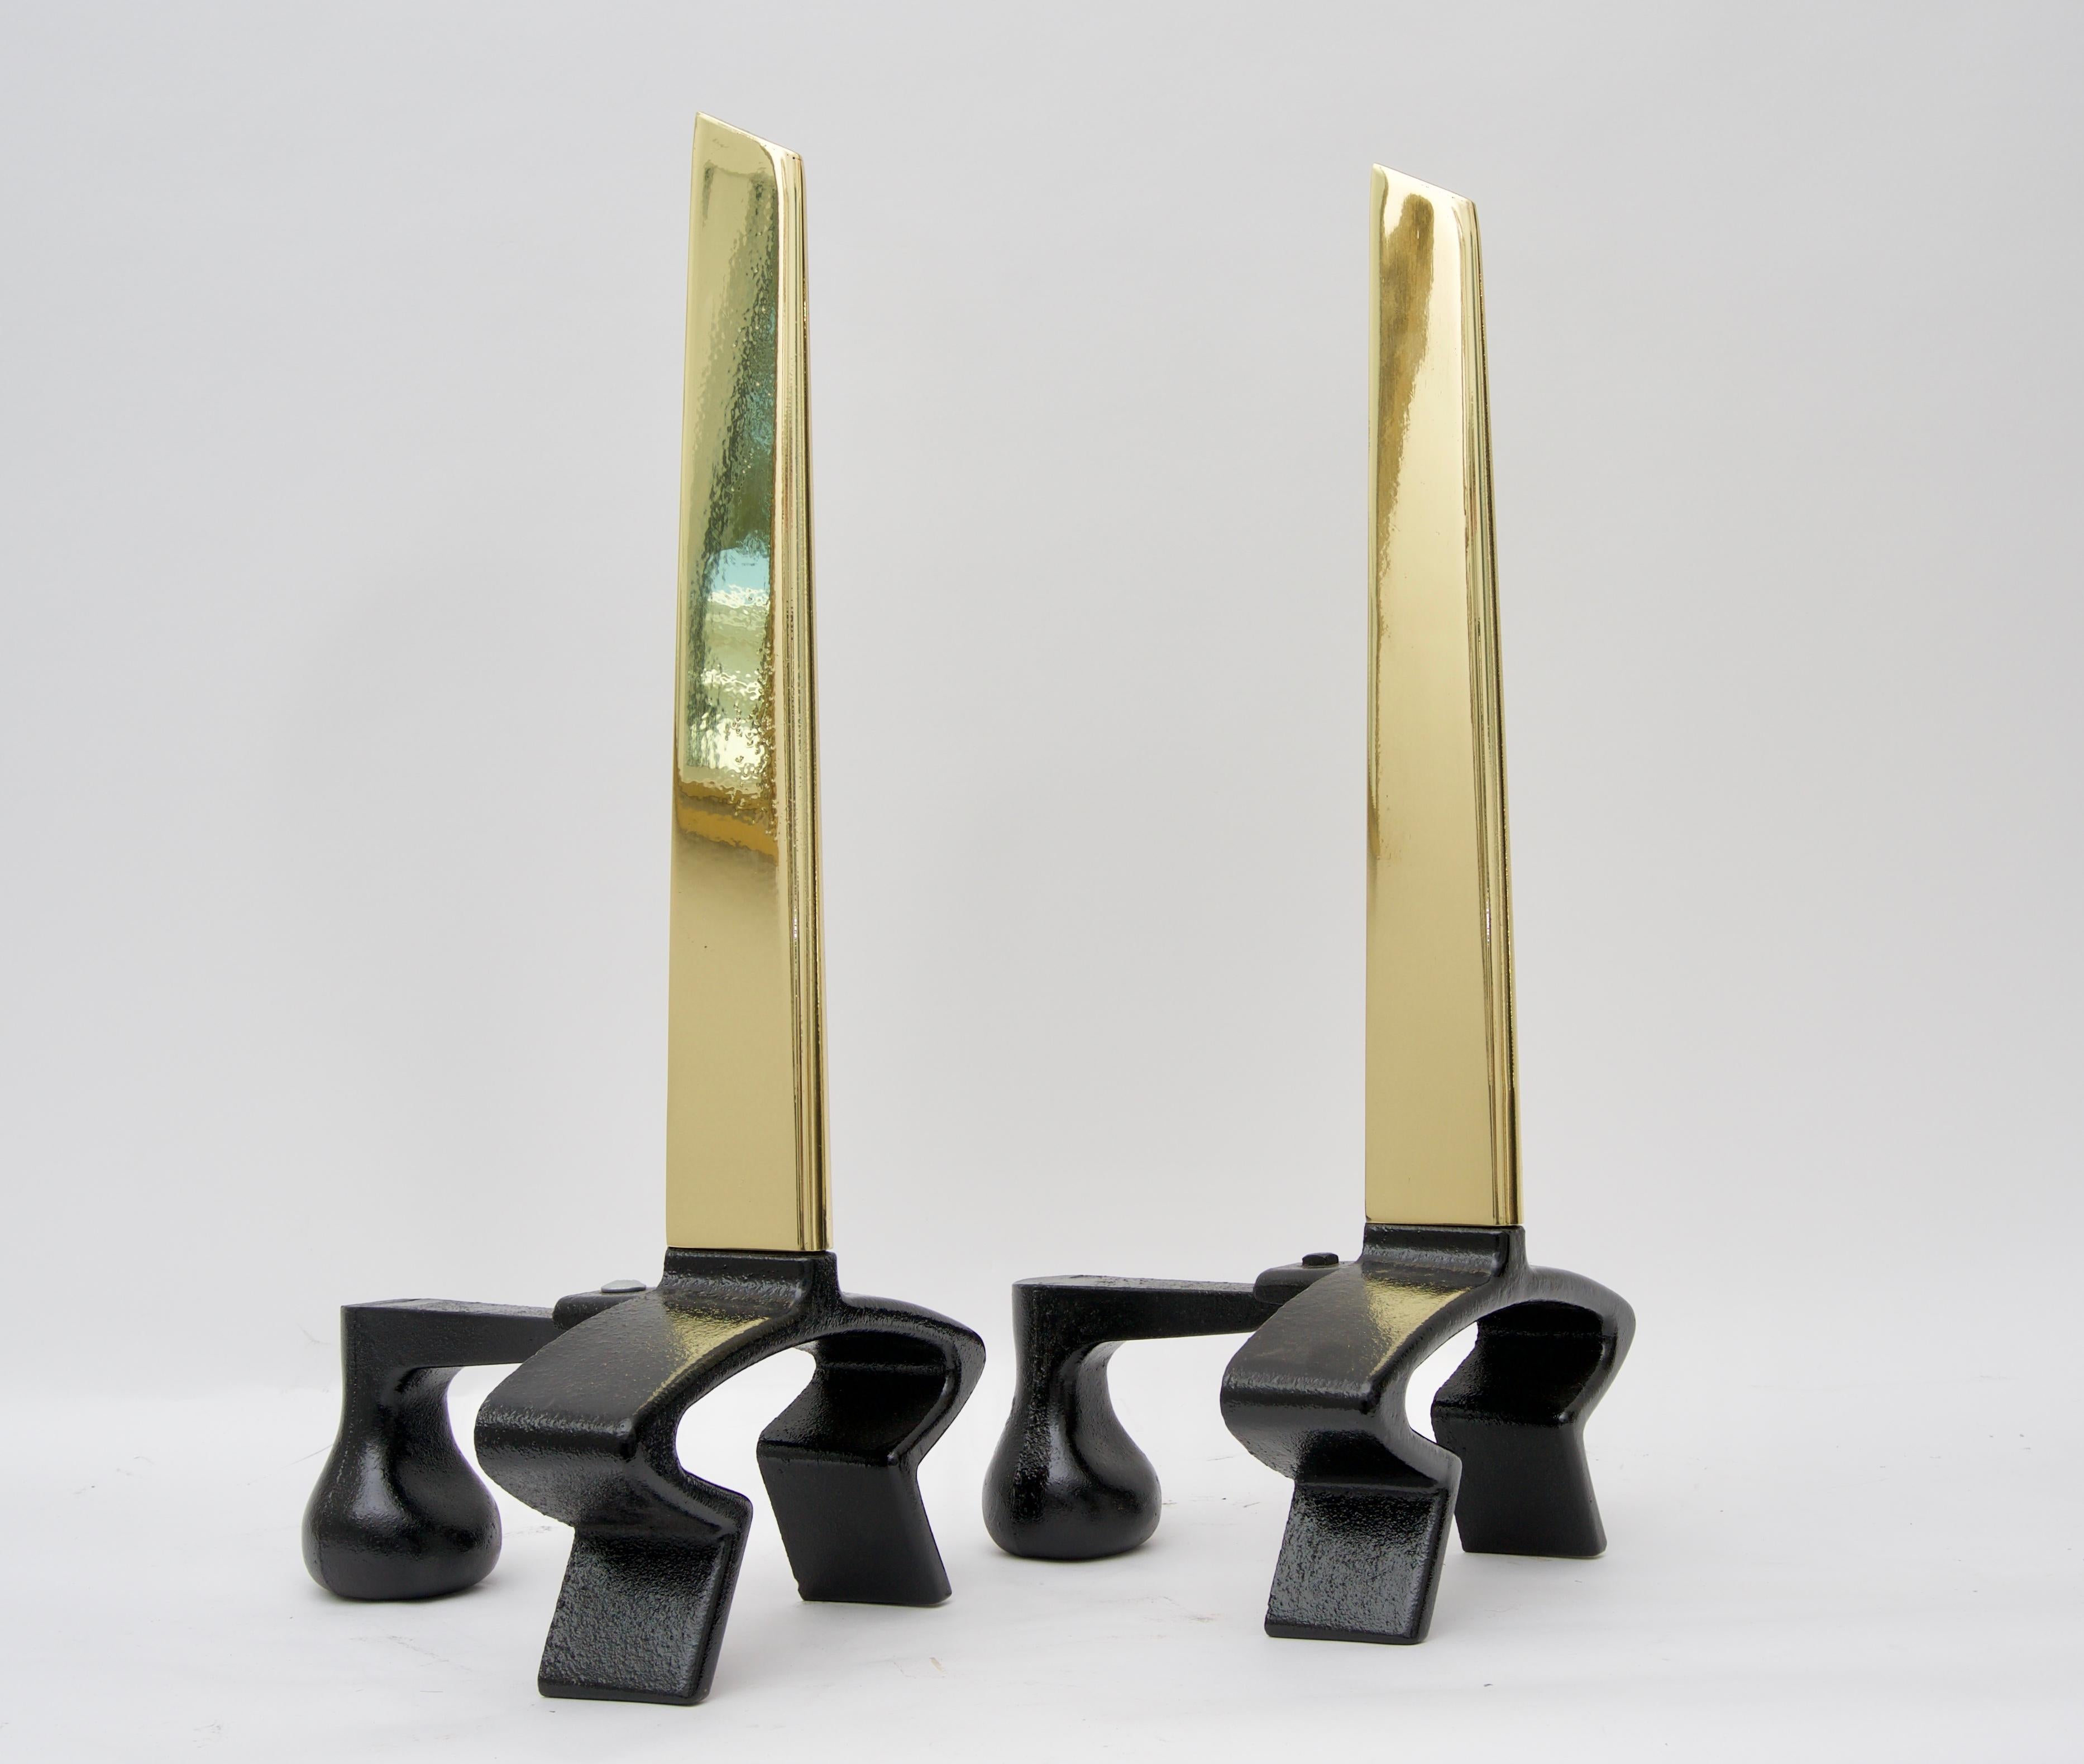 This stylish Mid-Century Modern set of andirons in polished brass and black iron date to the 1950s and have been professionally polished and will make a great look for your fires this winter season.